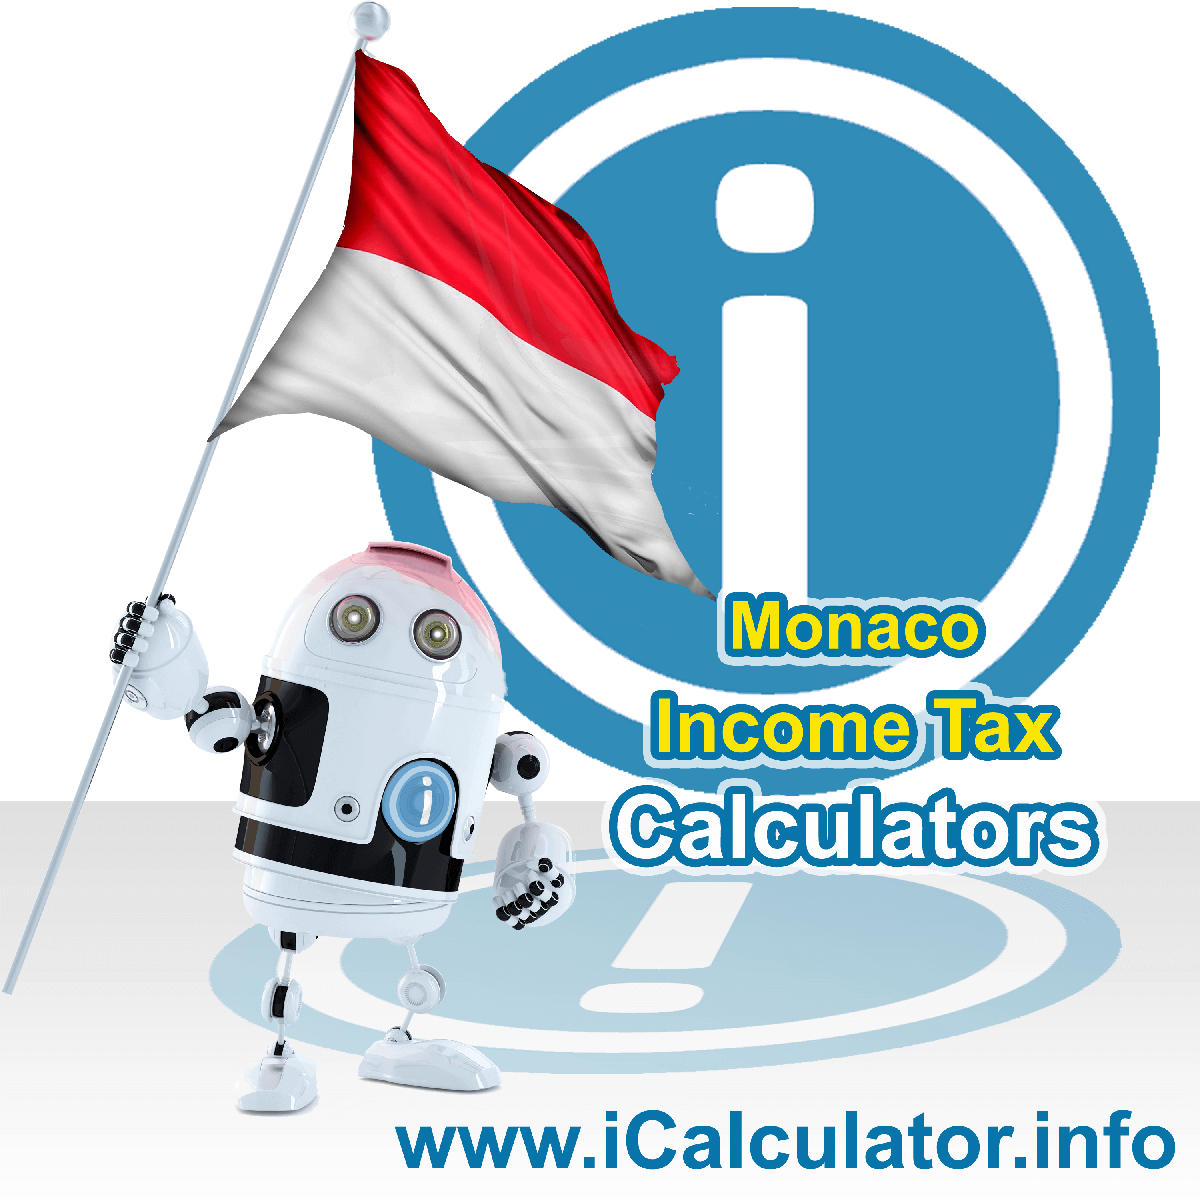 Monaco Income Tax Calculator. This image shows a new employer in Monaco calculating the annual payroll costs based on multiple payroll payments in one year in Monaco using the Monaco income tax calculator to understand their payroll costs in Monaco in 2022